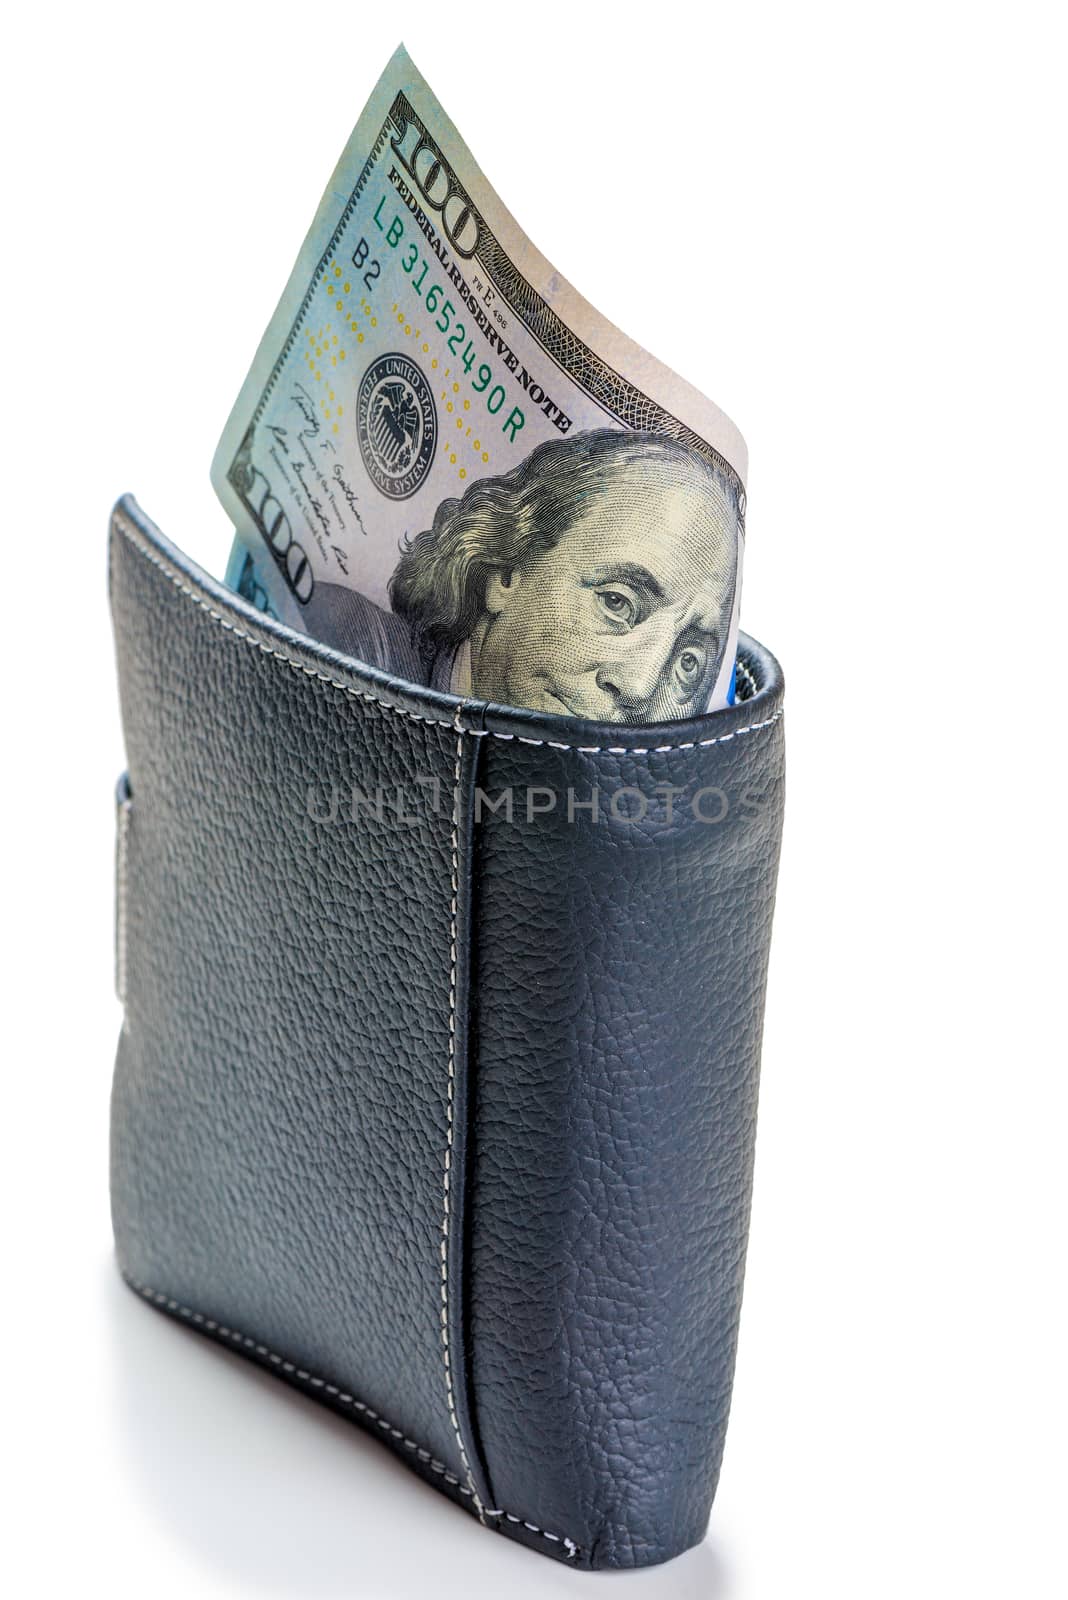 closeup black wallet full of 100 dollar bills isolated on white by kosmsos111